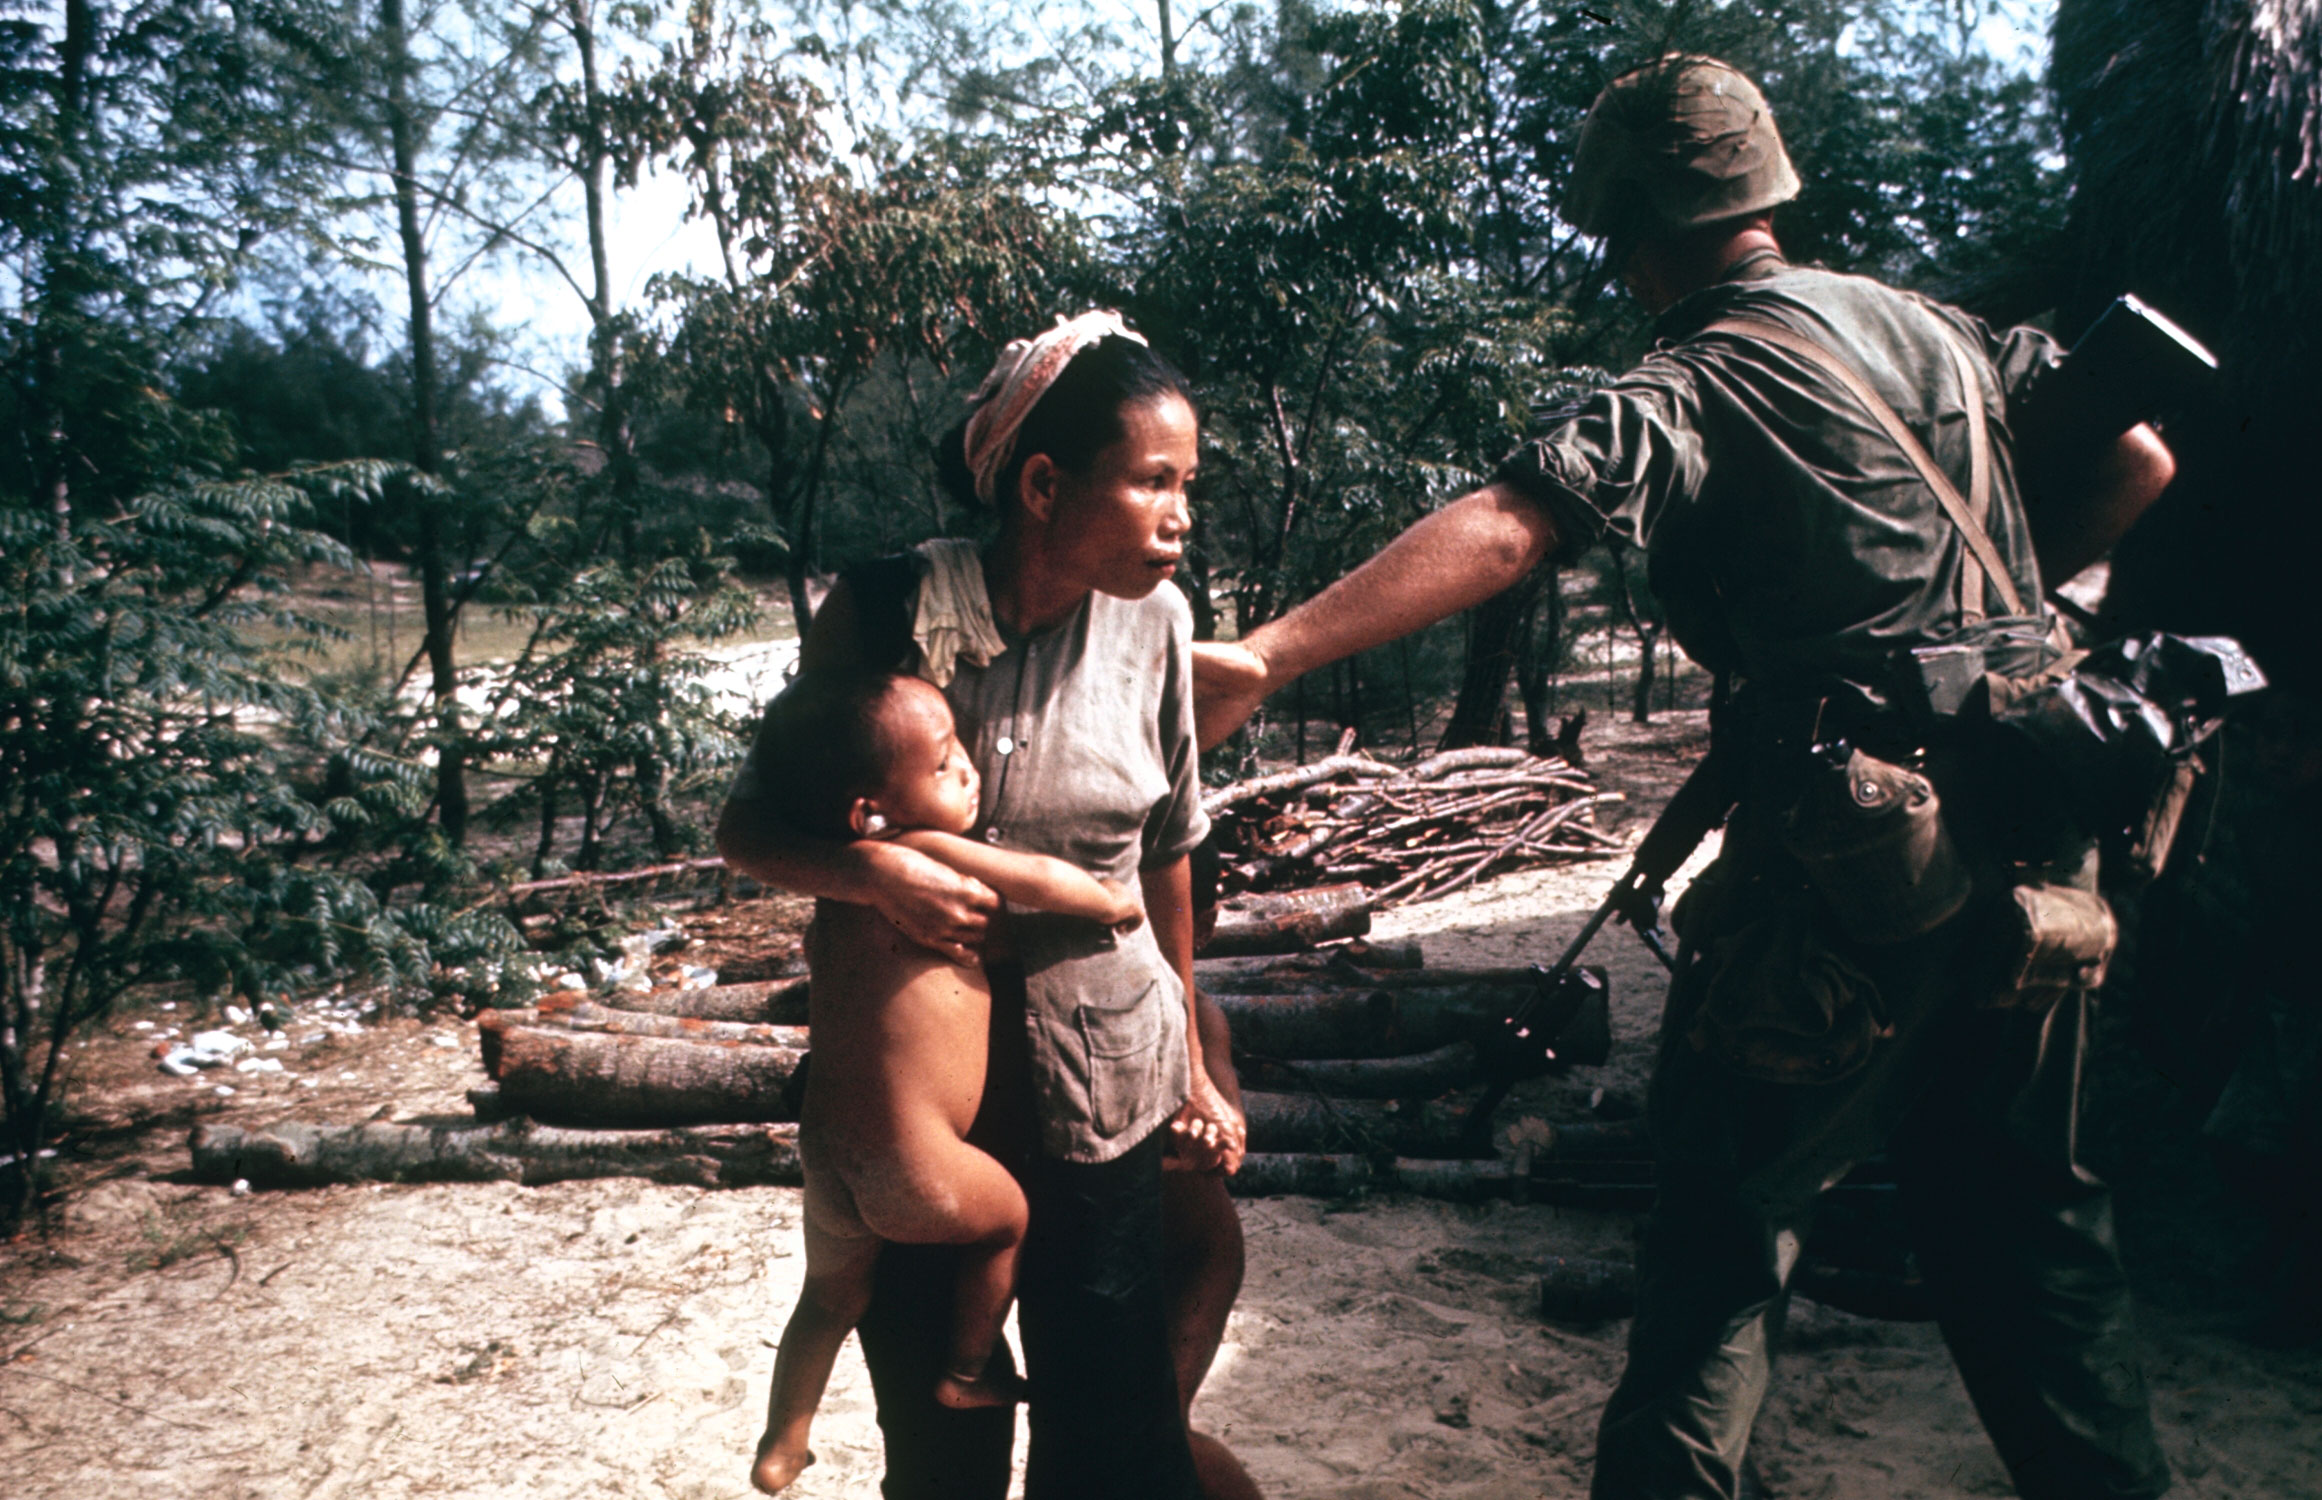 Marine leading a sweep into a fortified village pushes woman so he will have an unobstructed field of fire.